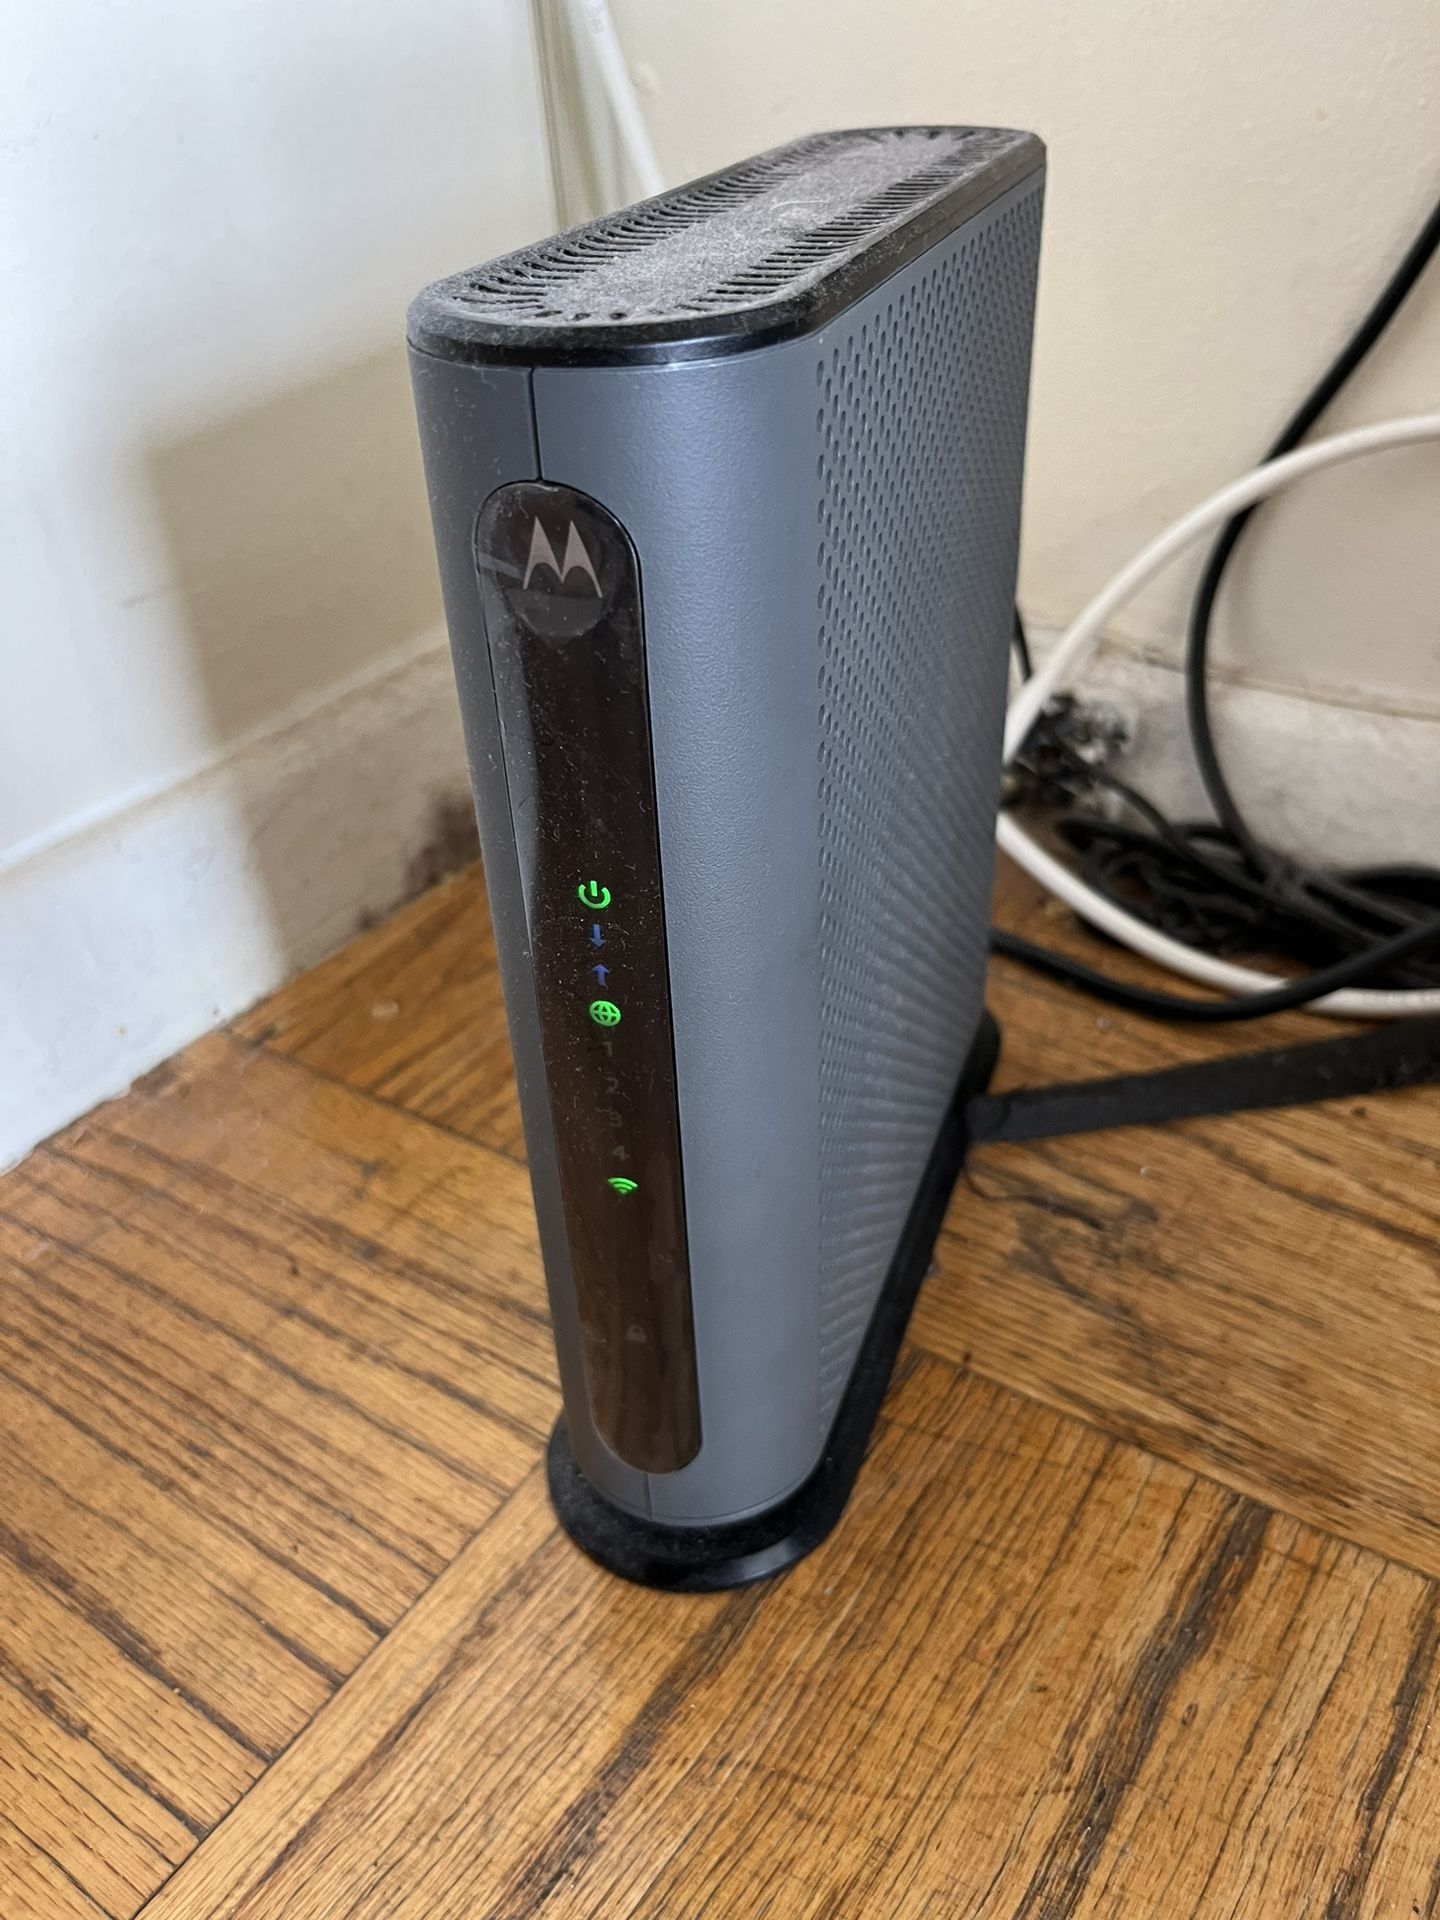 Motorola MG7315 Modem WiFi Router Combo | DOCSIS 3.0 Cable Modem + N450 Single Band Wi-Fi Gigabit Router | 343 Mbps Max Speeds | Approved by Cox and S